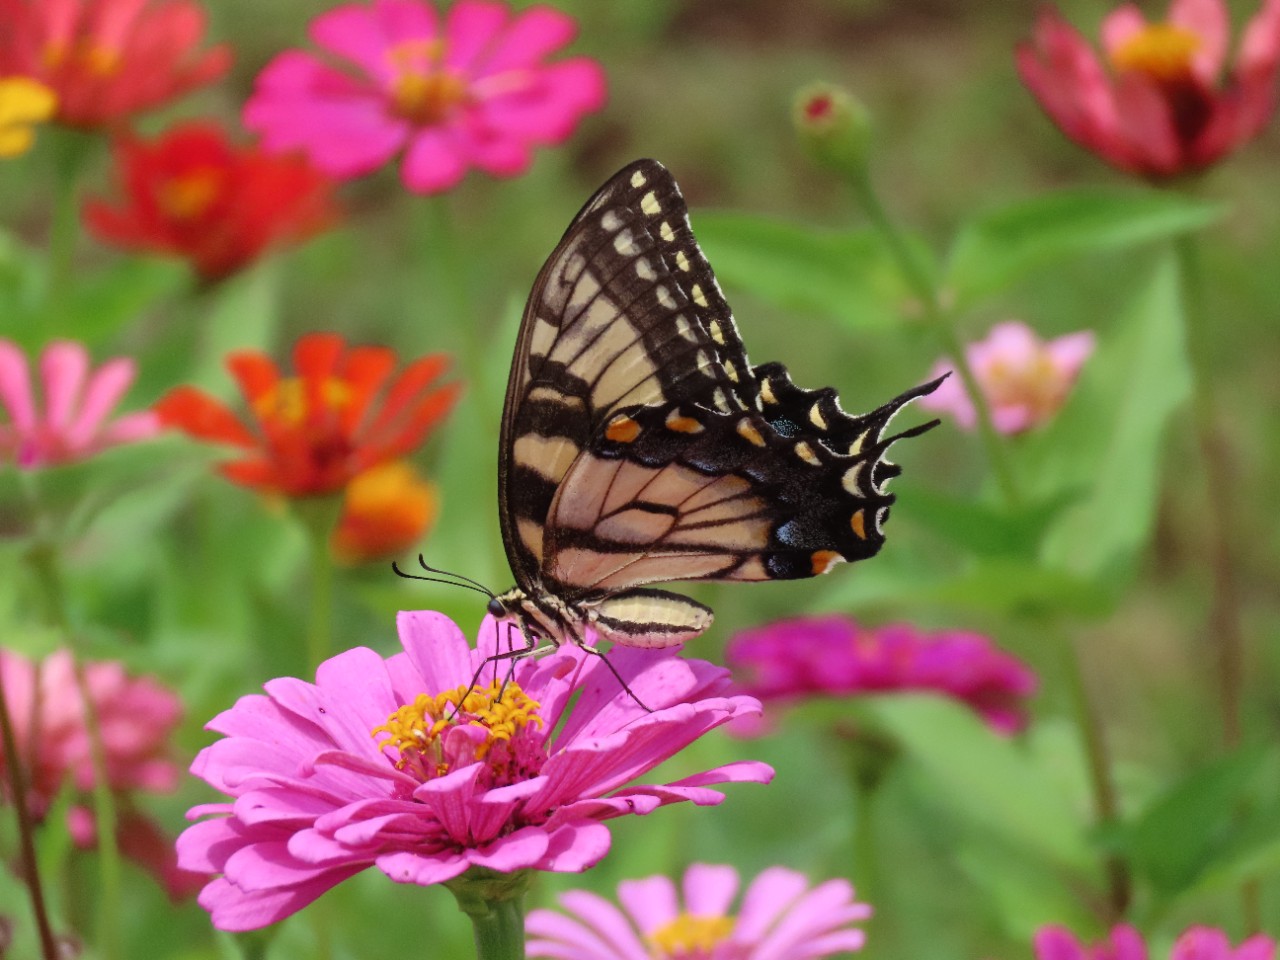 a closeup photo of a black and tan butterfly perched on a purple flower in a field of red and purple flowers